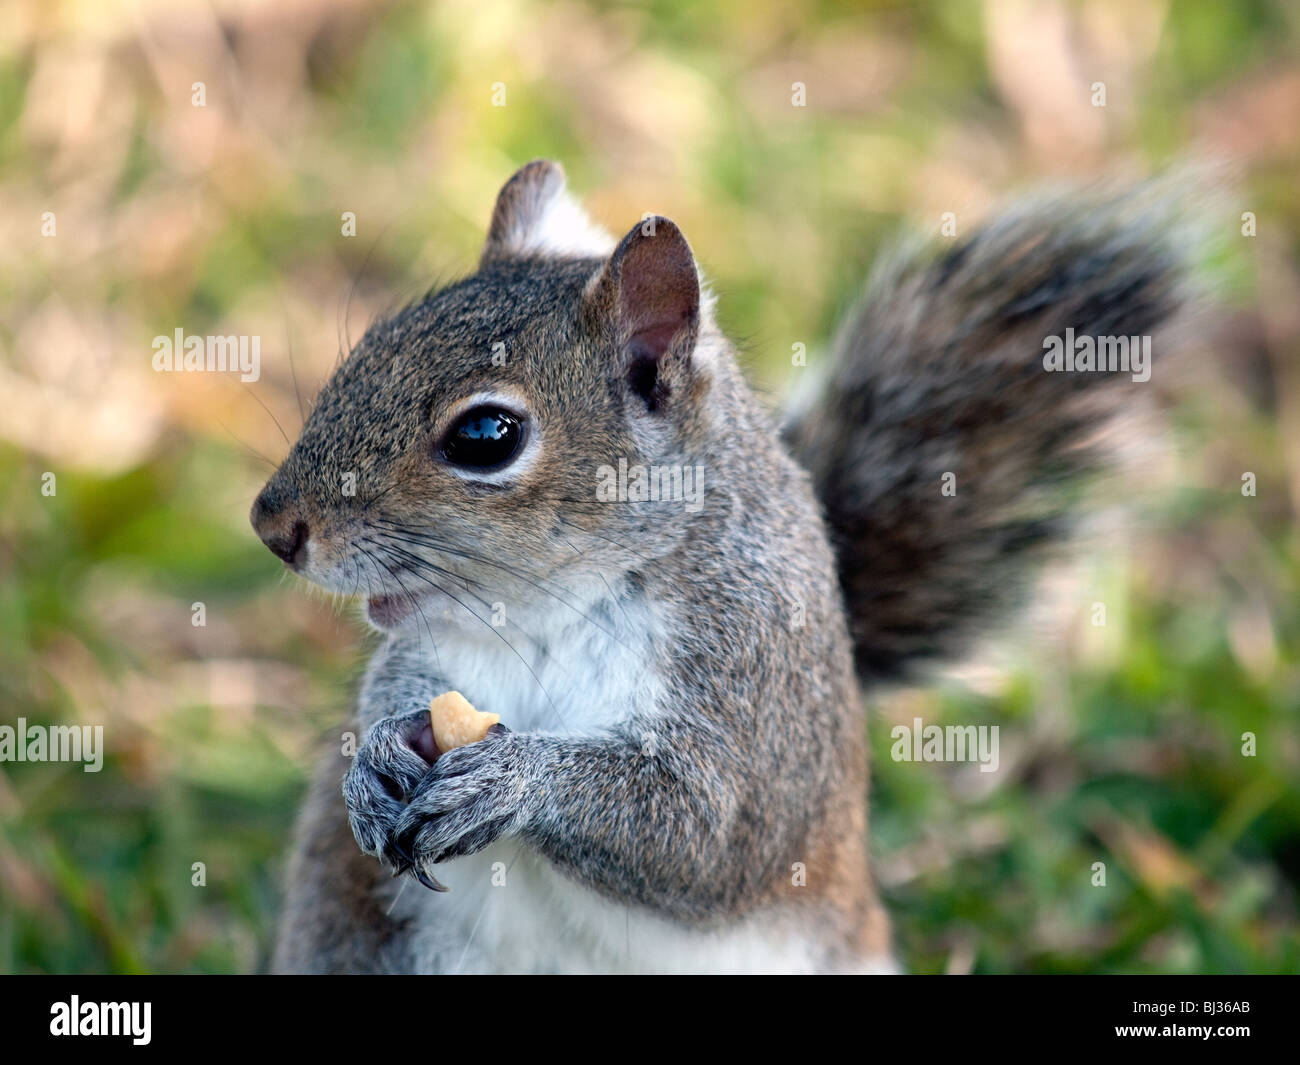 SCIURUS CAROLINENSIS OR EASTERN GRAY SQUIRREL EATING A STOLEN PEANUT ON THE INDIAN RIVER IN FLORIDA Stock Photo